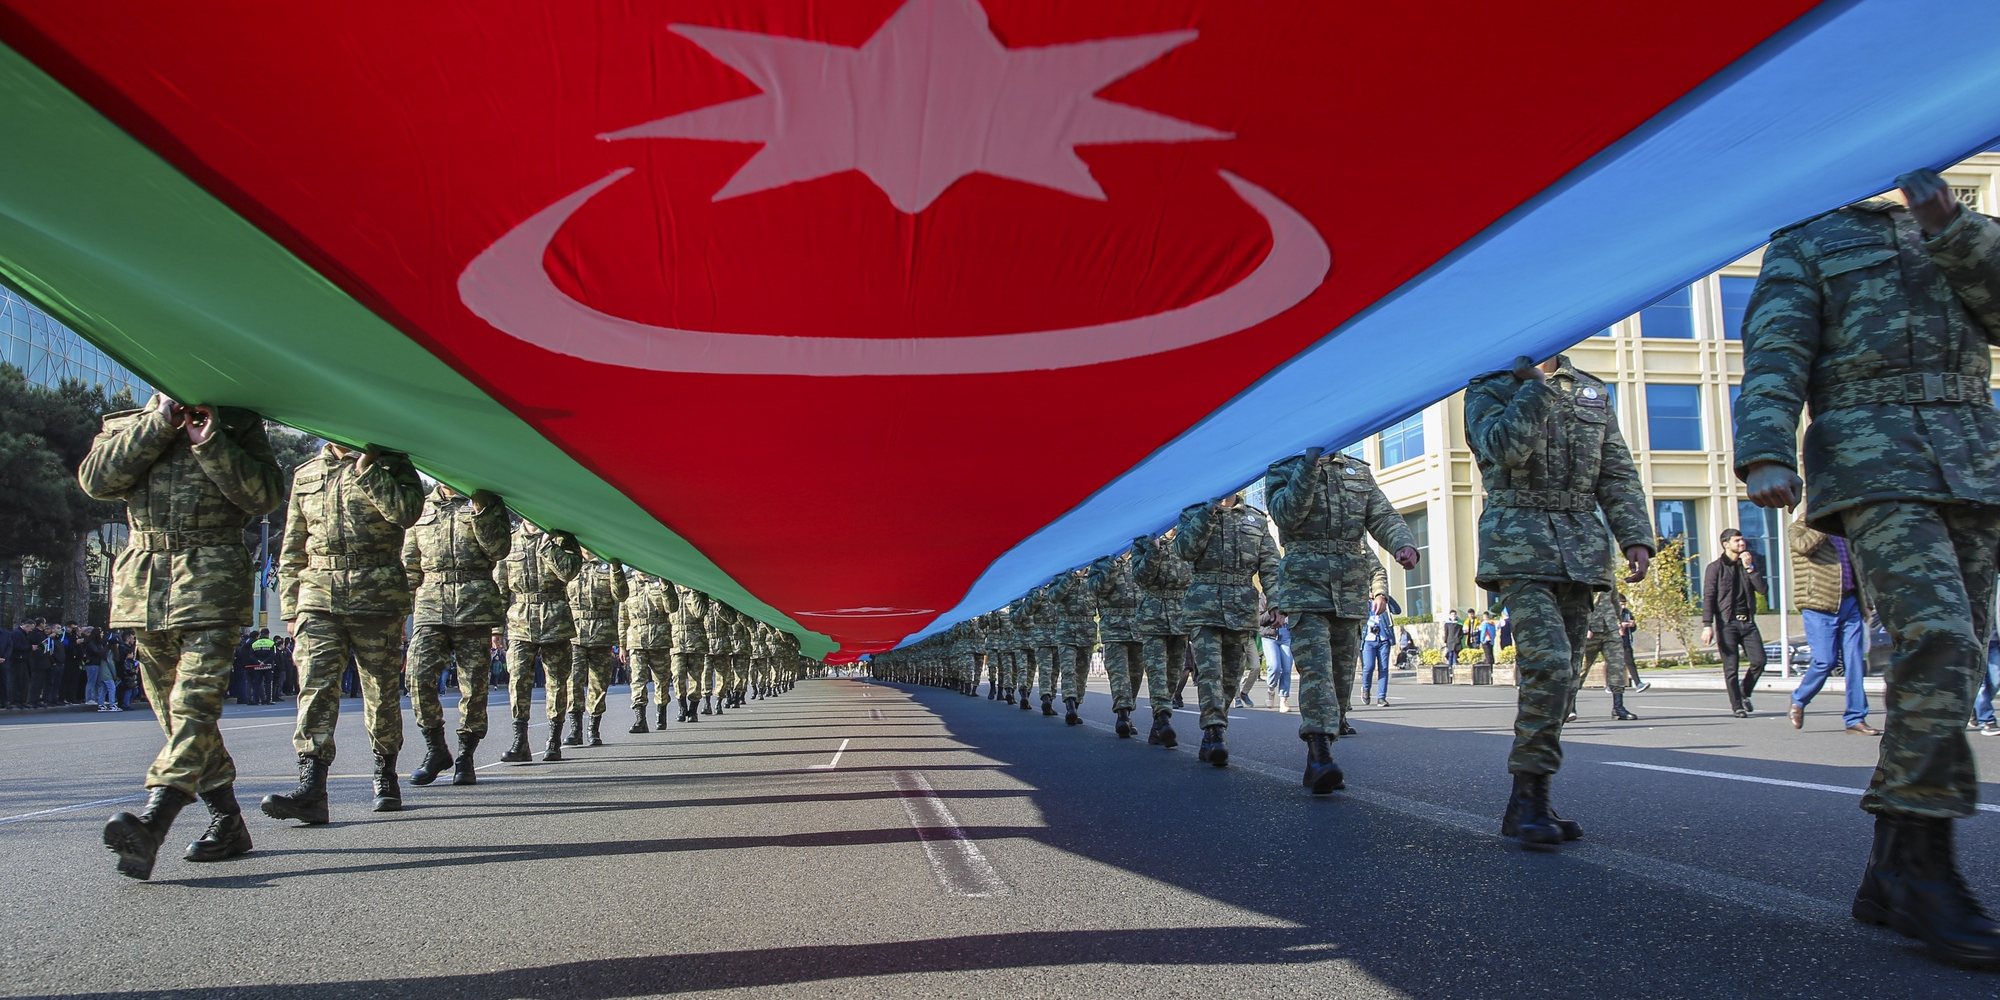 epa09571061 Azeri soldiers carry a large-scale national flag on the anniversary of the end of the 2020 war over the Nagorno-Karabakh region between Azerbaijan and Armenia, in downtown Baku, Azerbaijan, 08 November 2021. On 10 November 2020, a joint statement was published by the President of Azerbaijan, the Prime Minister of Armenia and the President of Russia on the complete cessation of all hostilities in the zone of the Nagorno-Karabakh conflict from 00:00 Moscow time.  As a result of the war, Baku regained a number of territories lost in the early 1990s. According to information disseminated by the Azerbaijani Ministry of Defense, some 2,783 Armed Forces servicemen were killed in the armed conflict.  EPA/ROMAN ISMAYILOV